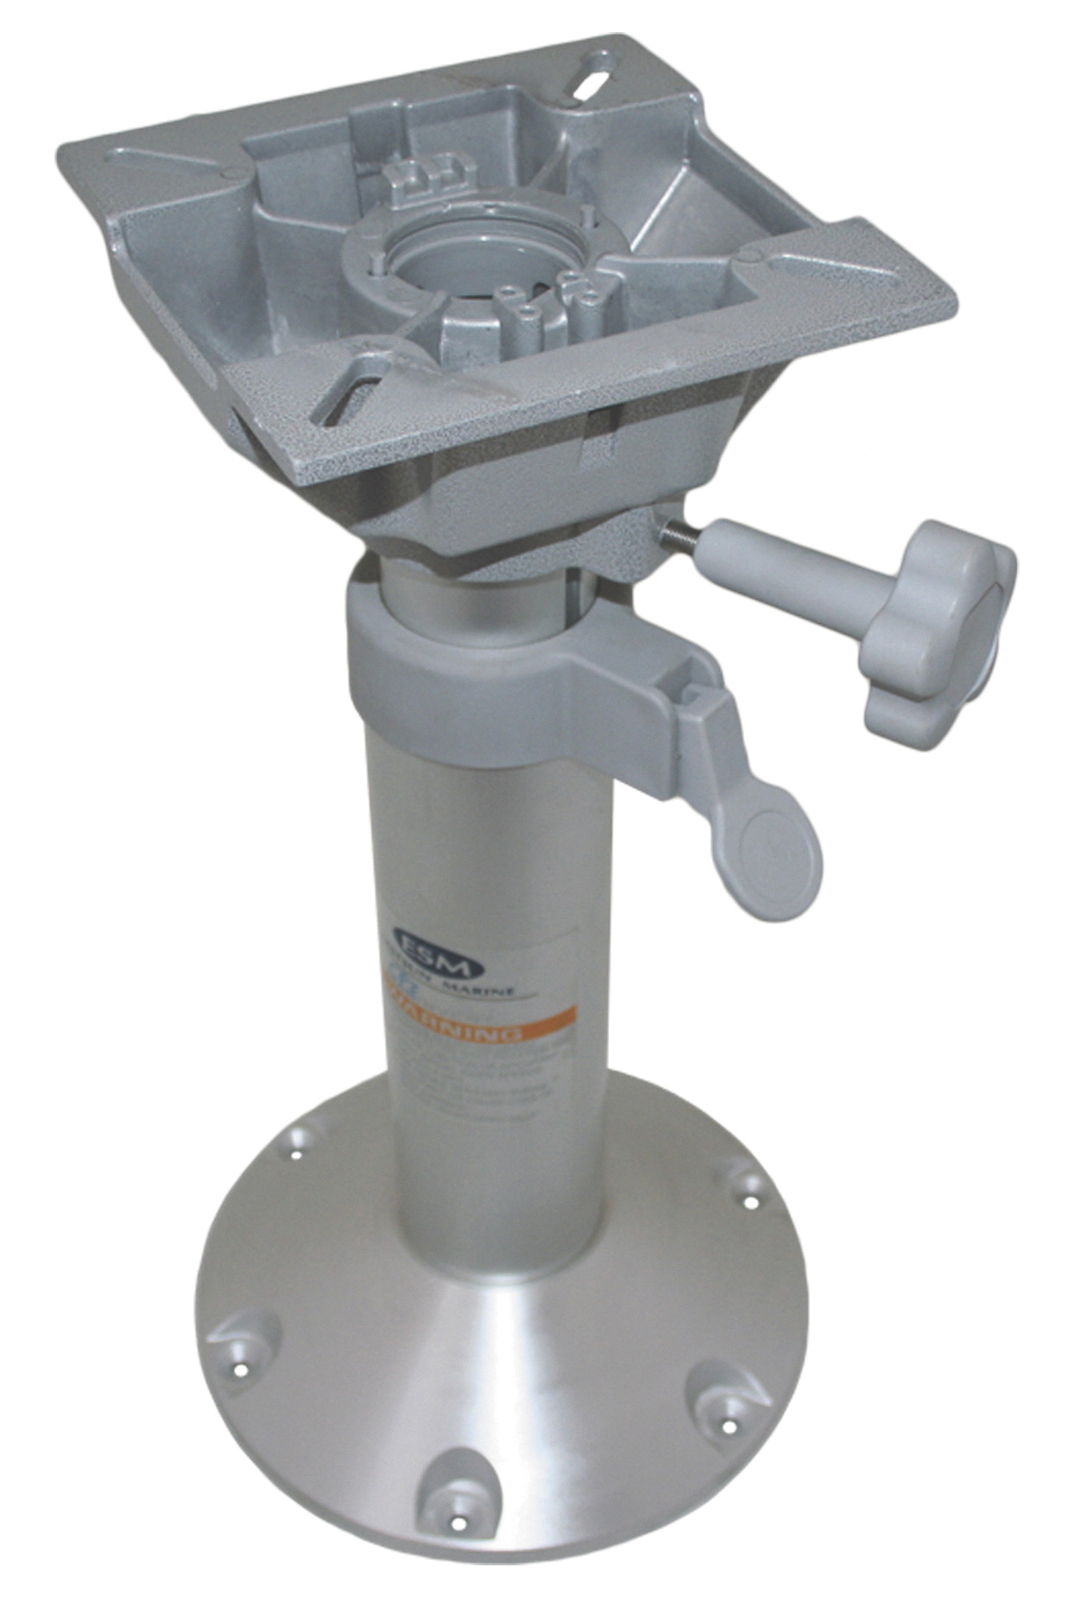 Seat Pedestal Adjustable With Swivel Top 280-400mm Height Adjustment